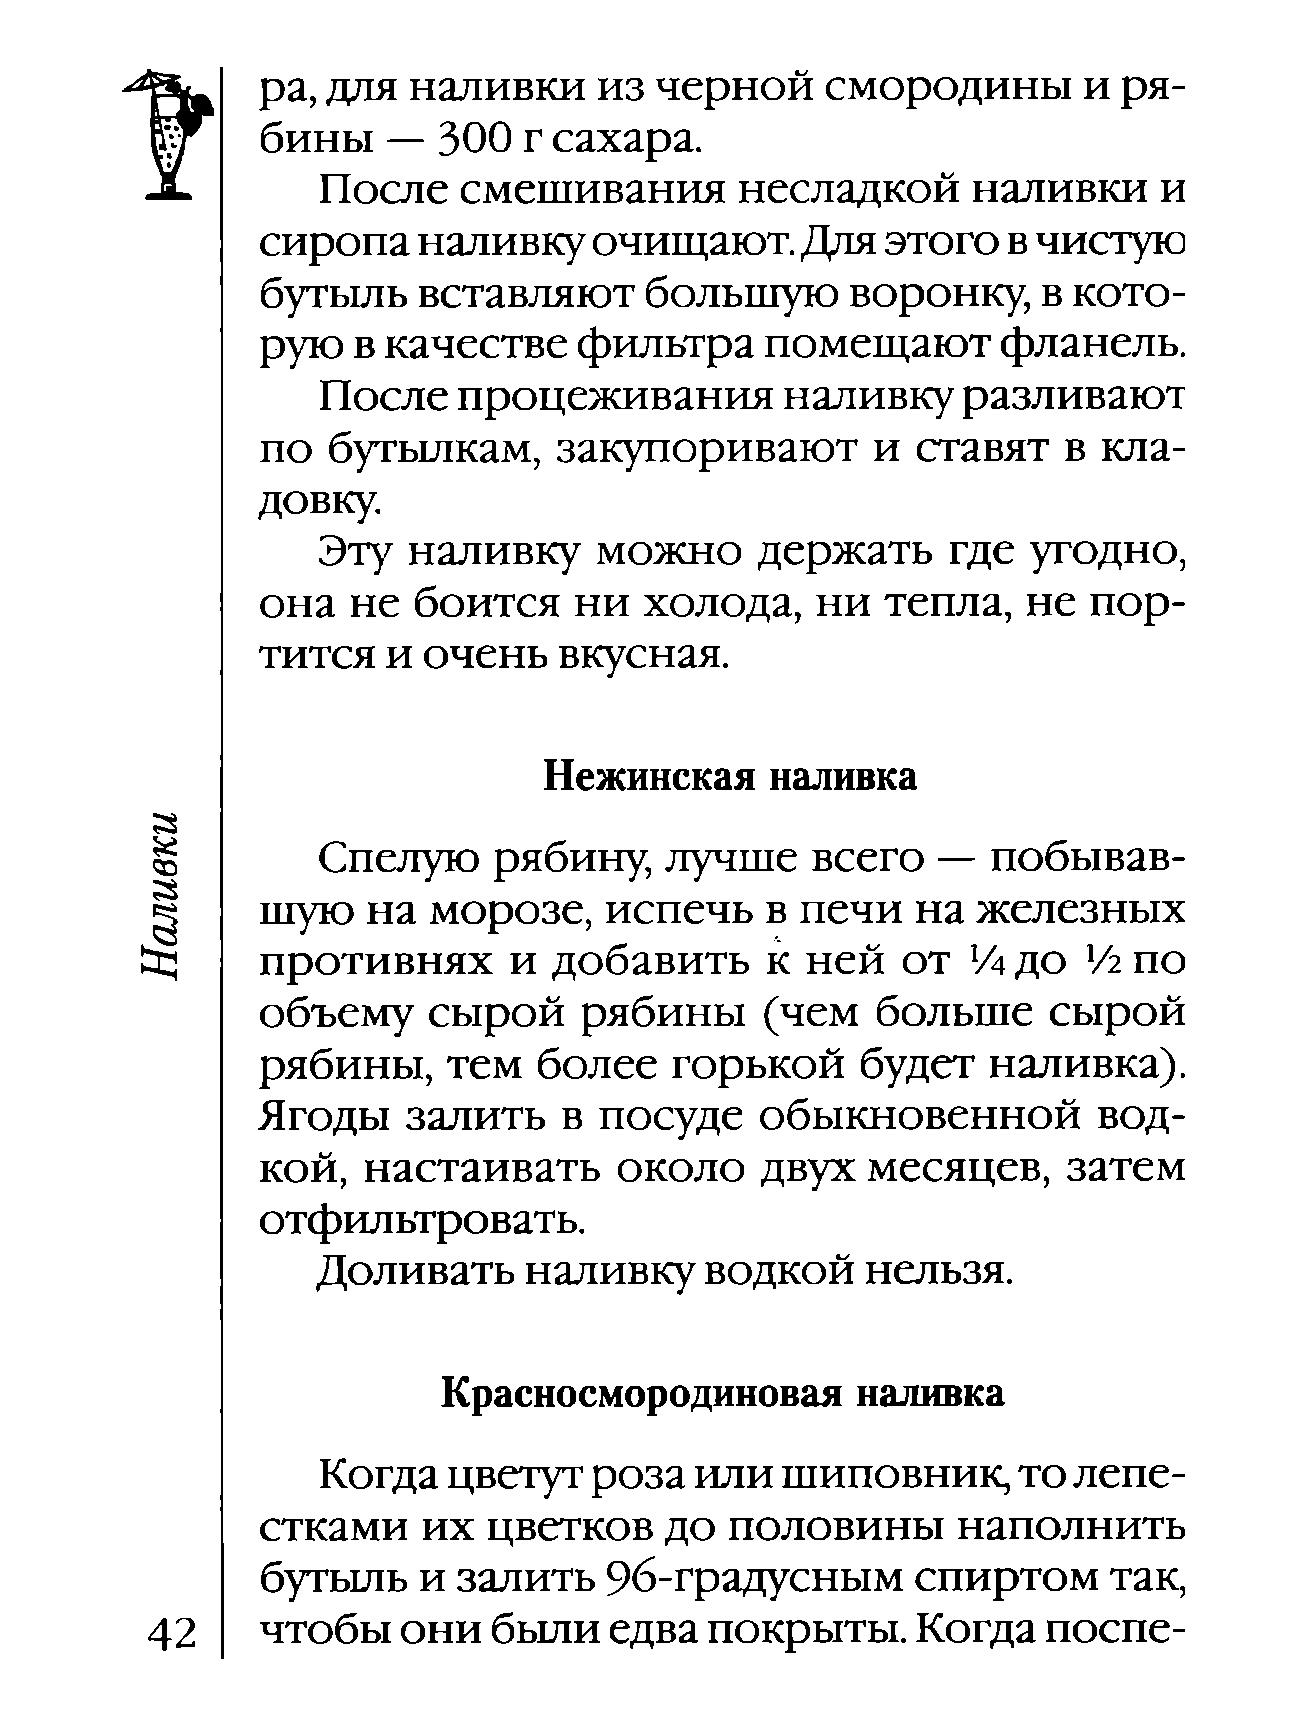 Page42